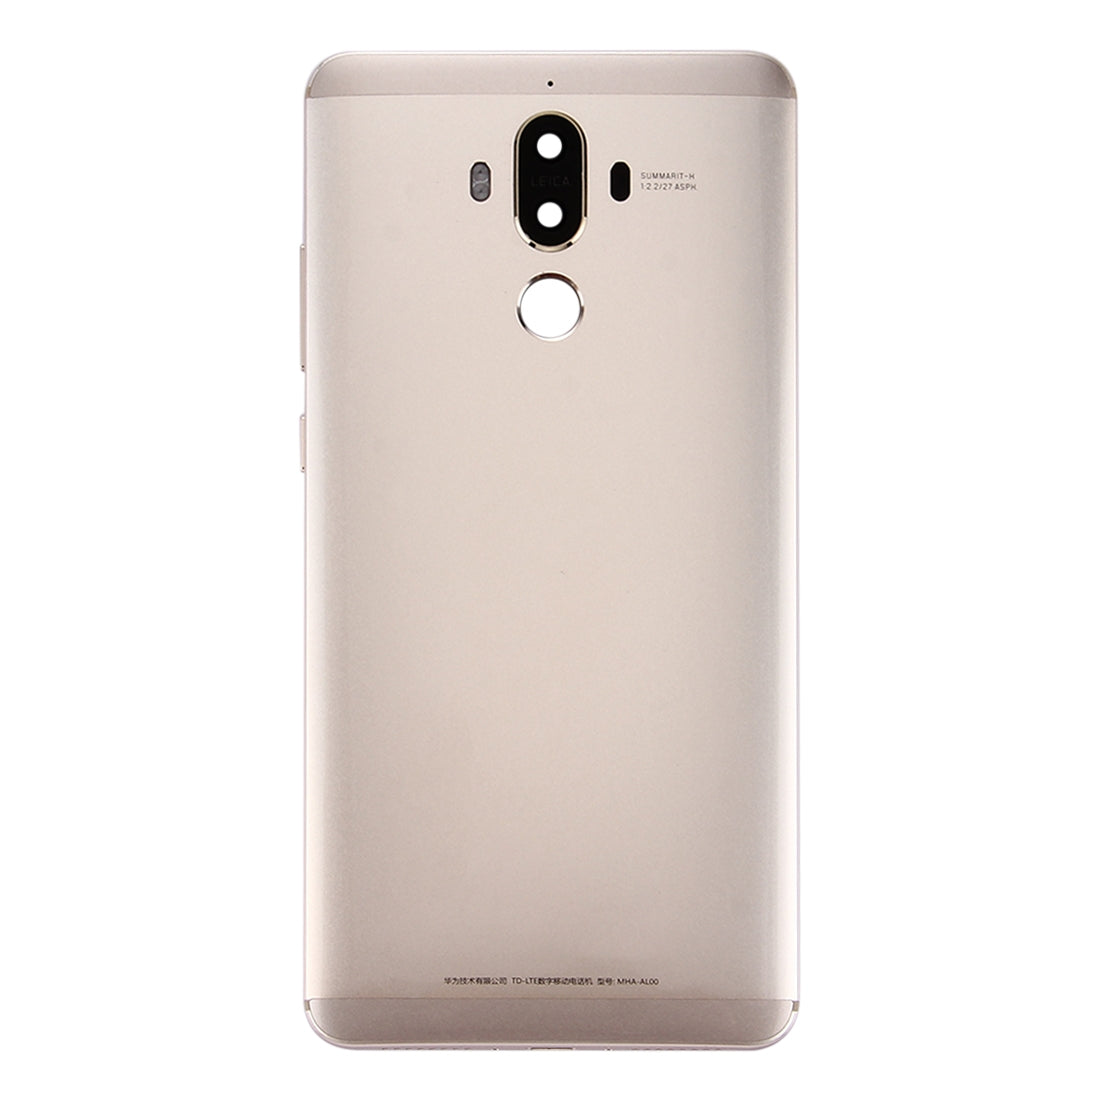 Cache Batterie Coque Arrière Huawei Mate 9 Or